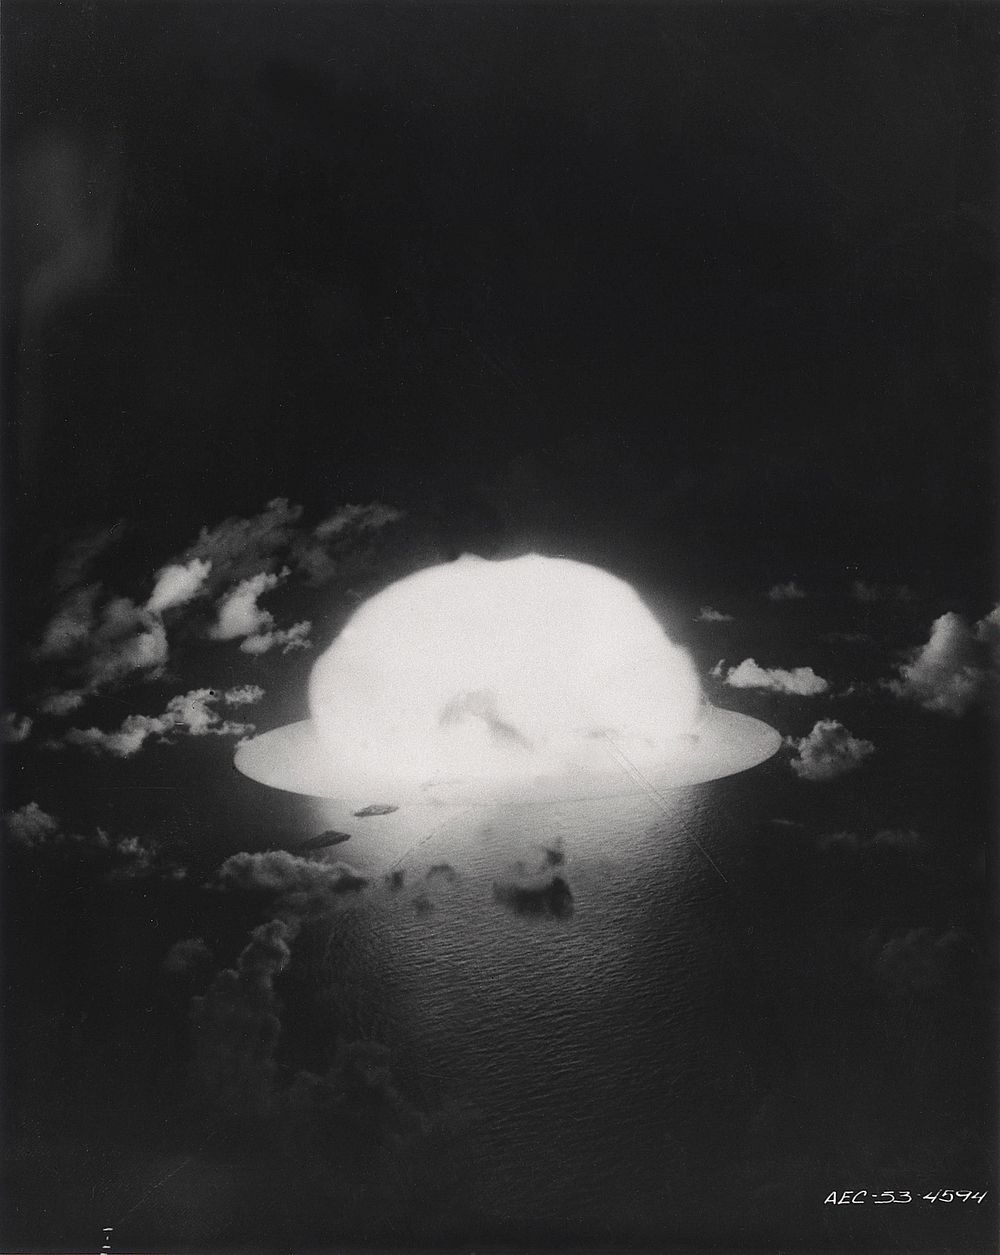 An early phase of a nuclear detonation at Eniwetok during the 1951 tests. Original public domain image from Flickr